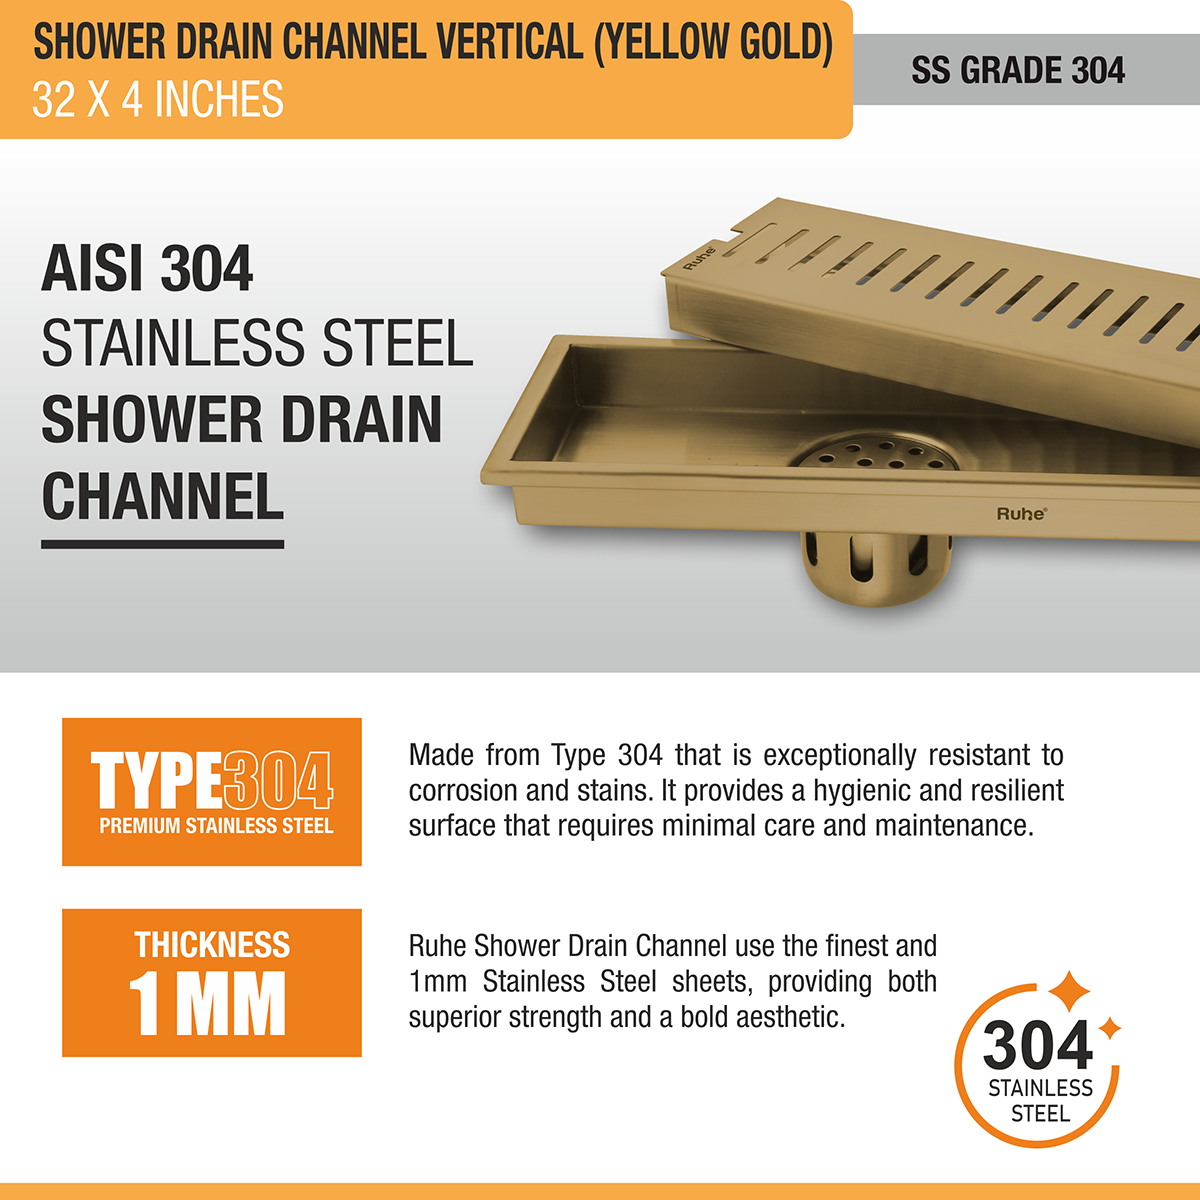 Vertical Shower Drain Channel (32 x 4 Inches) YELLOW GOLD stainless steel